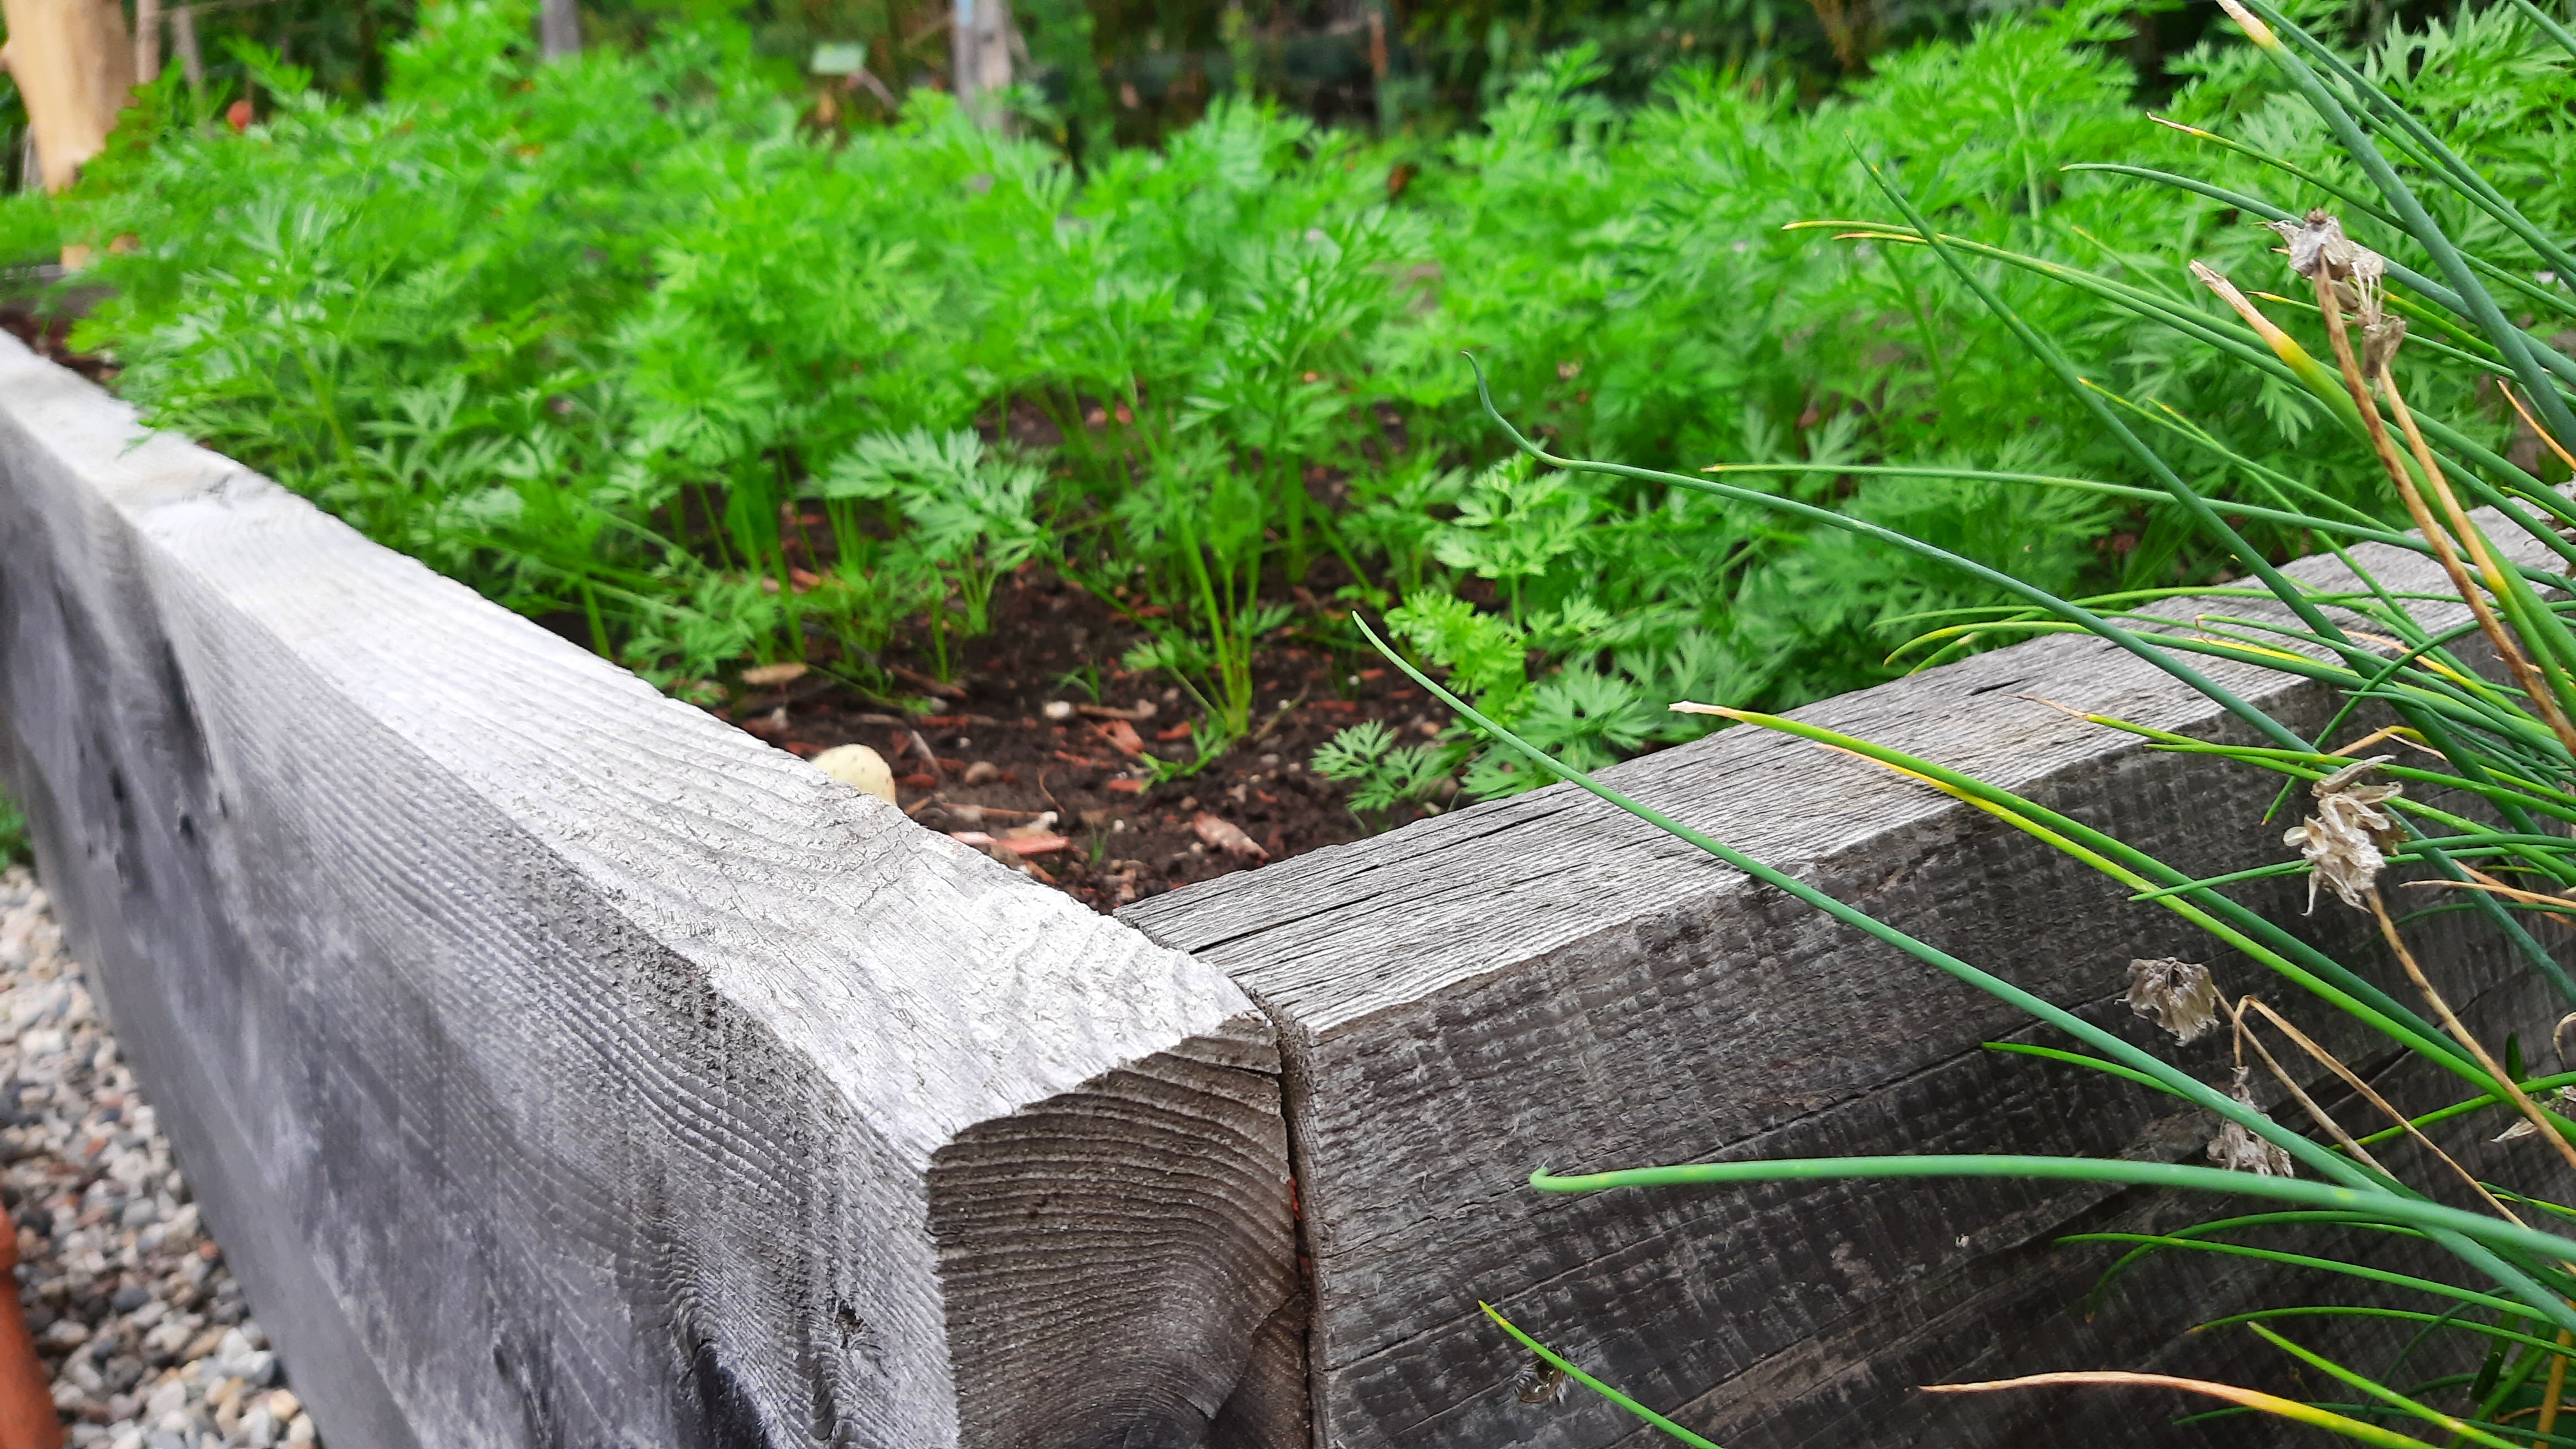 locally harvested and milled wood is used for raised garden beds